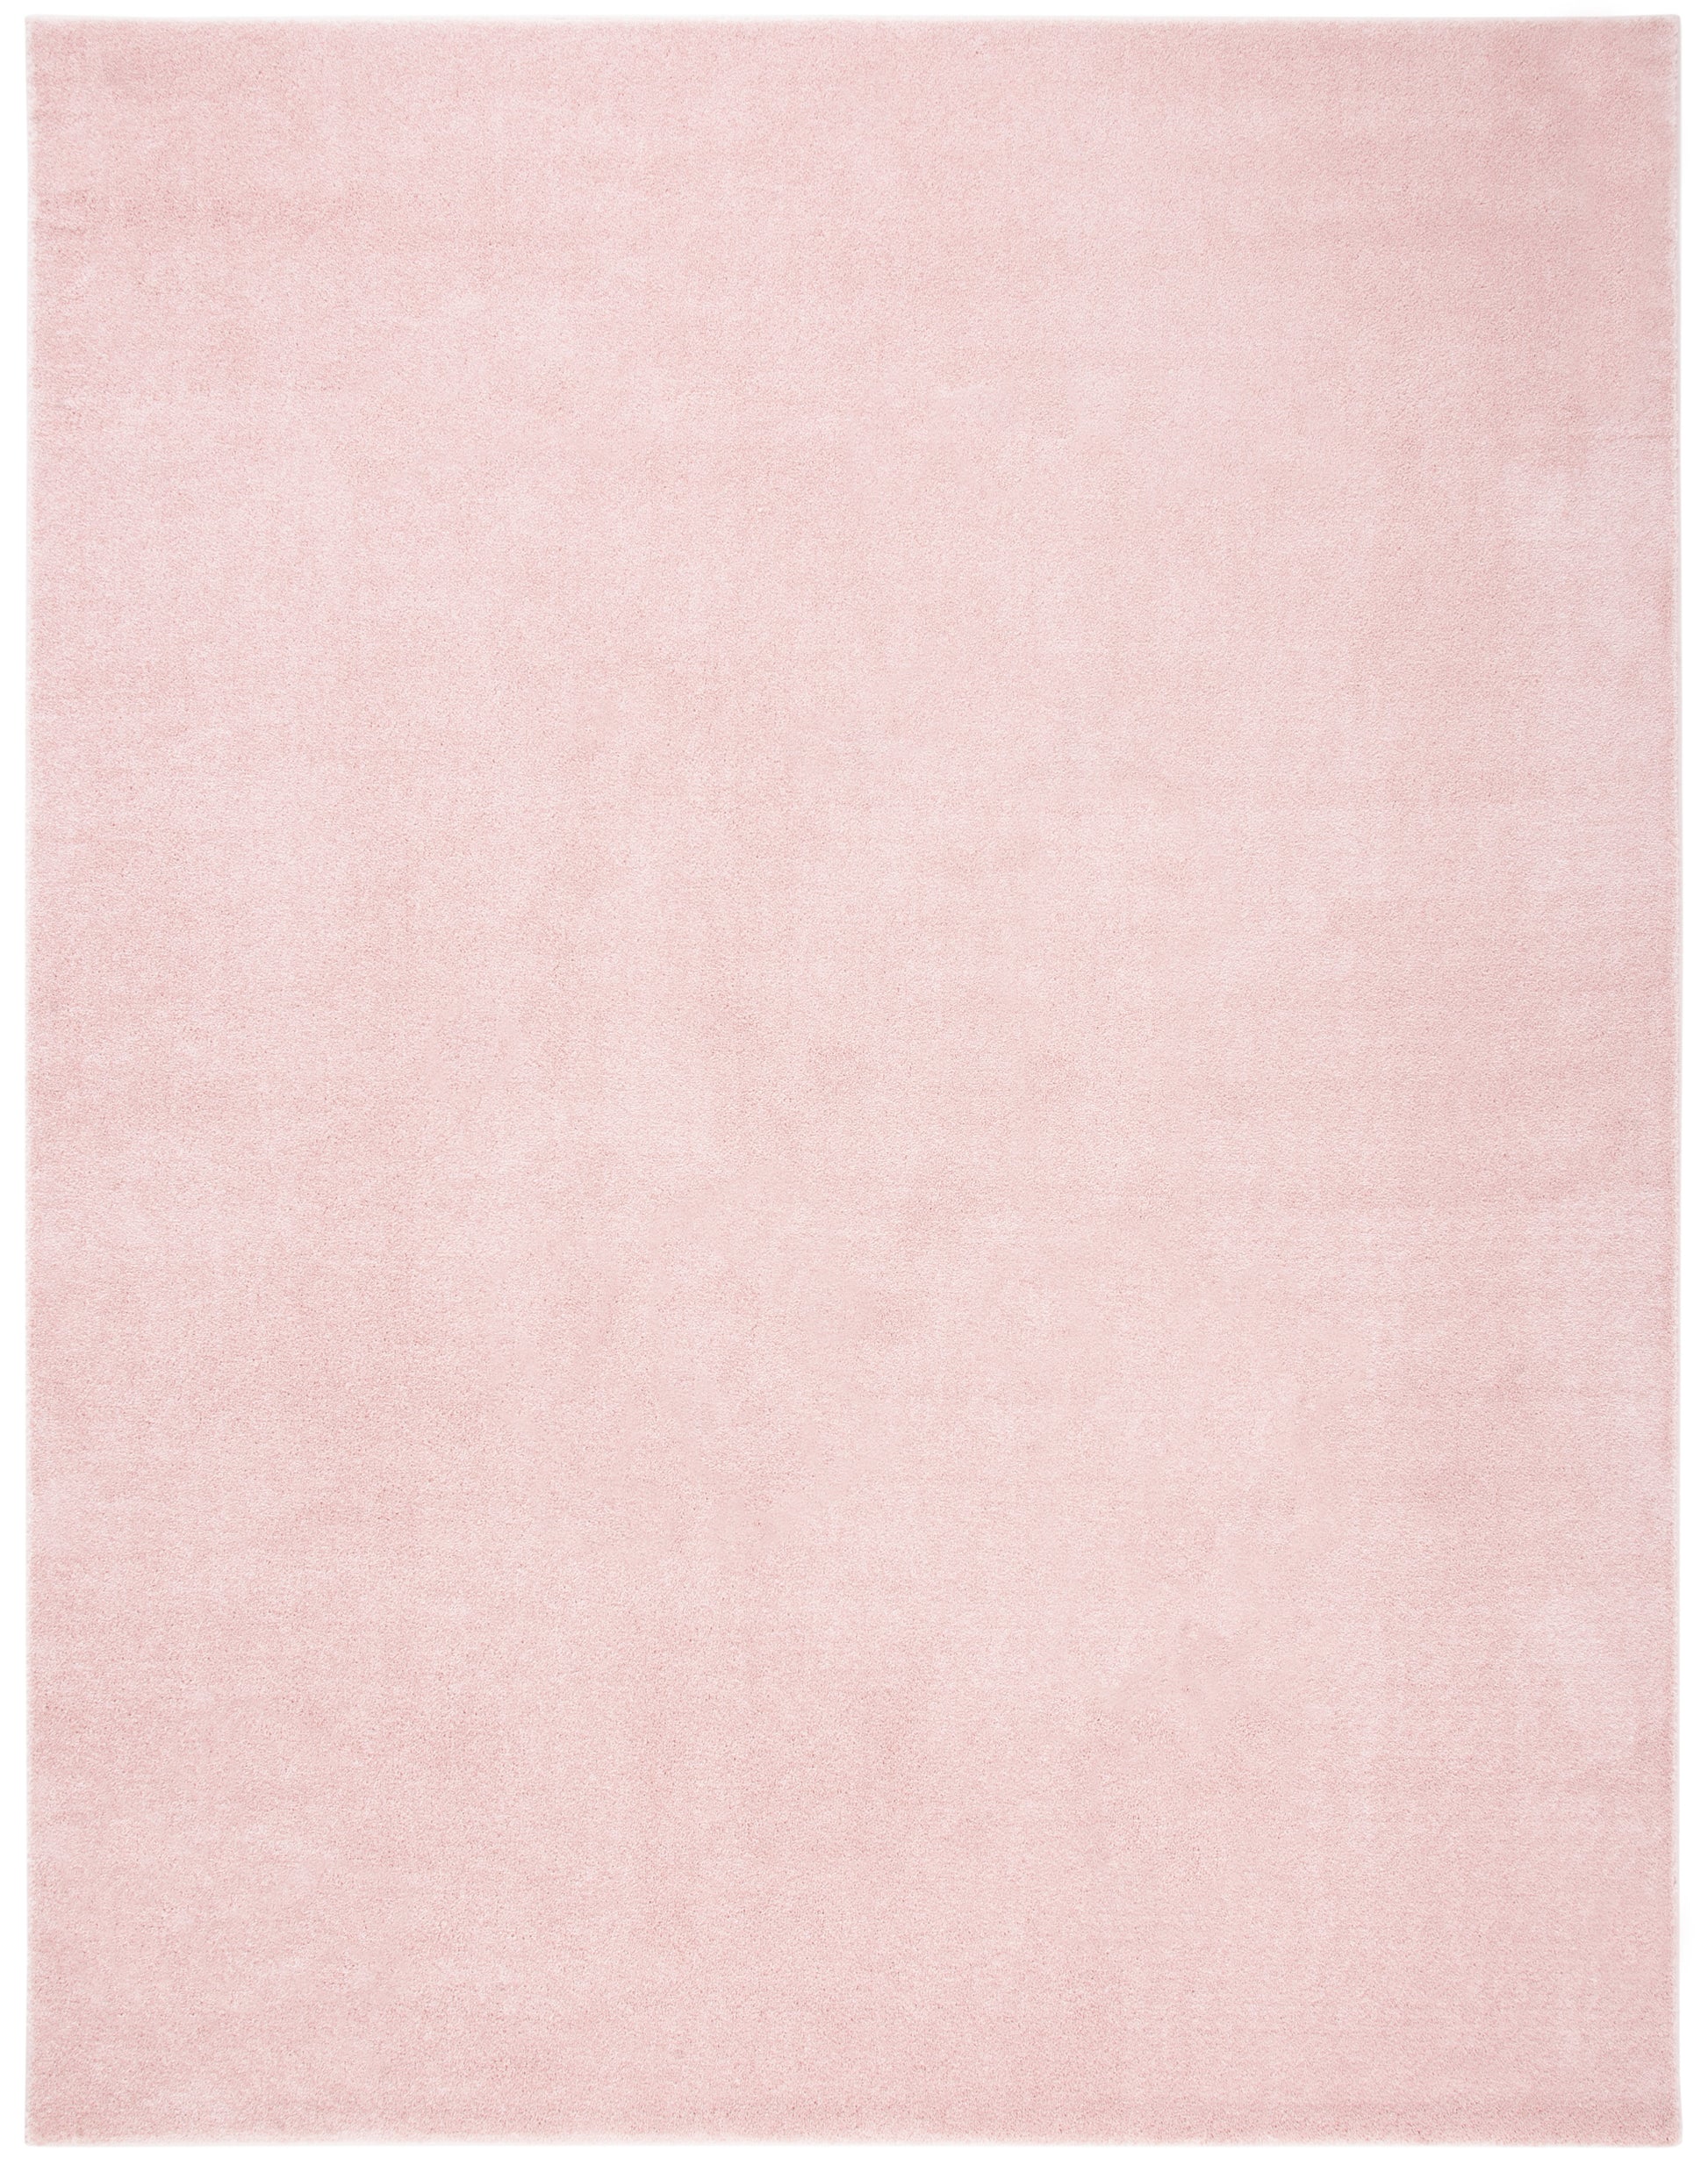 Safavieh Plain And Solid Pns320 Pink Area Rug